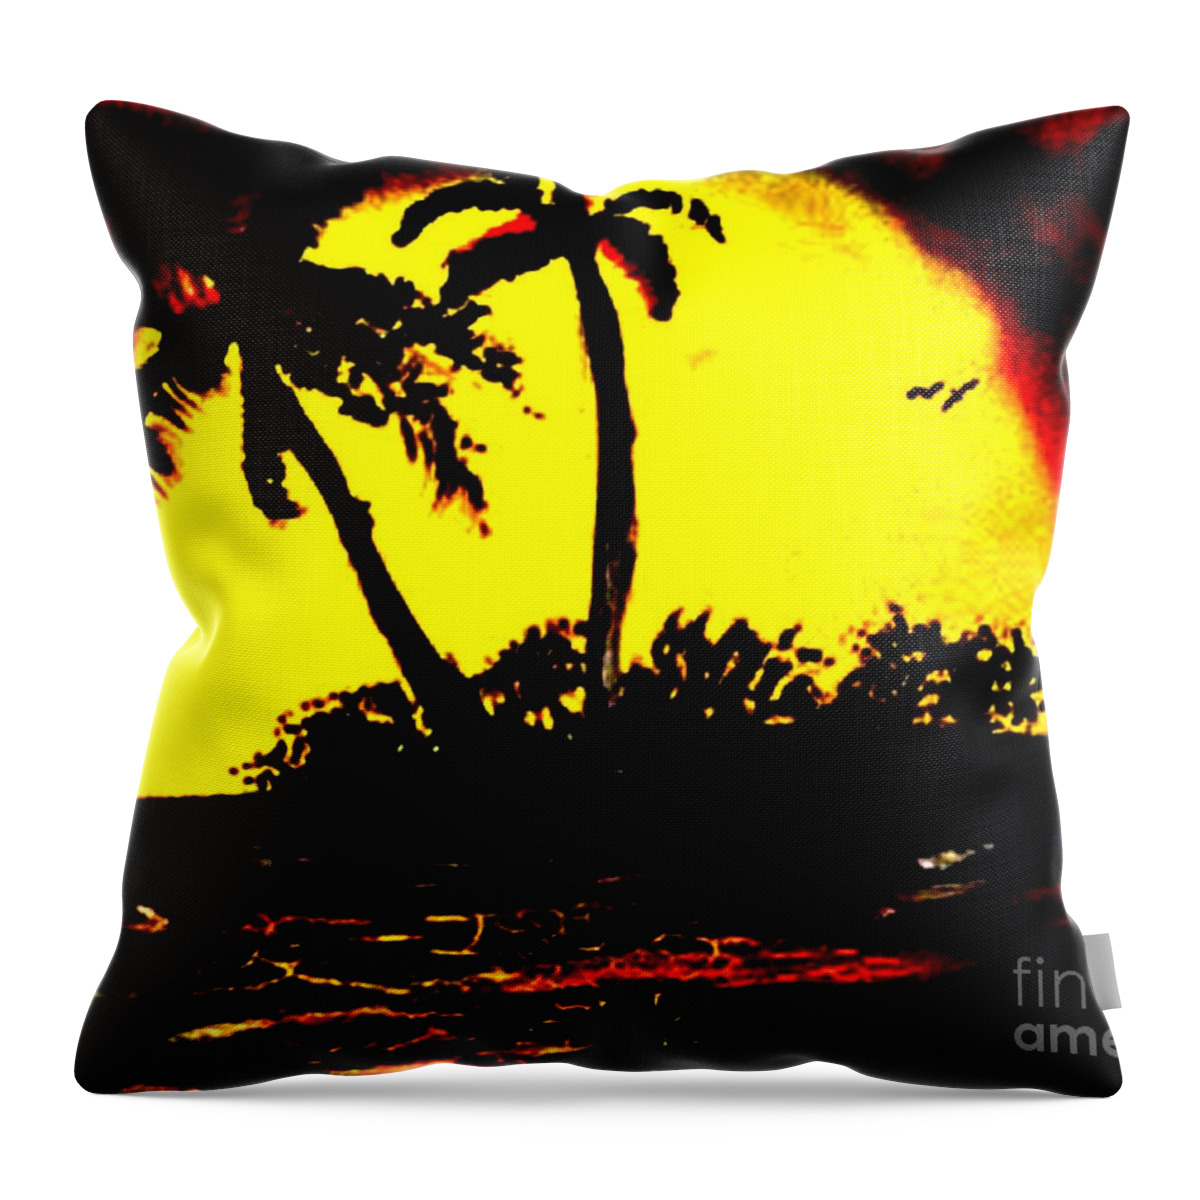 Marooned On A Deserted Island Original Art By James Daugherty Throw Pillow featuring the painting Marooned On A Deserted Island Original Art by James Daugherty by James Daugherty